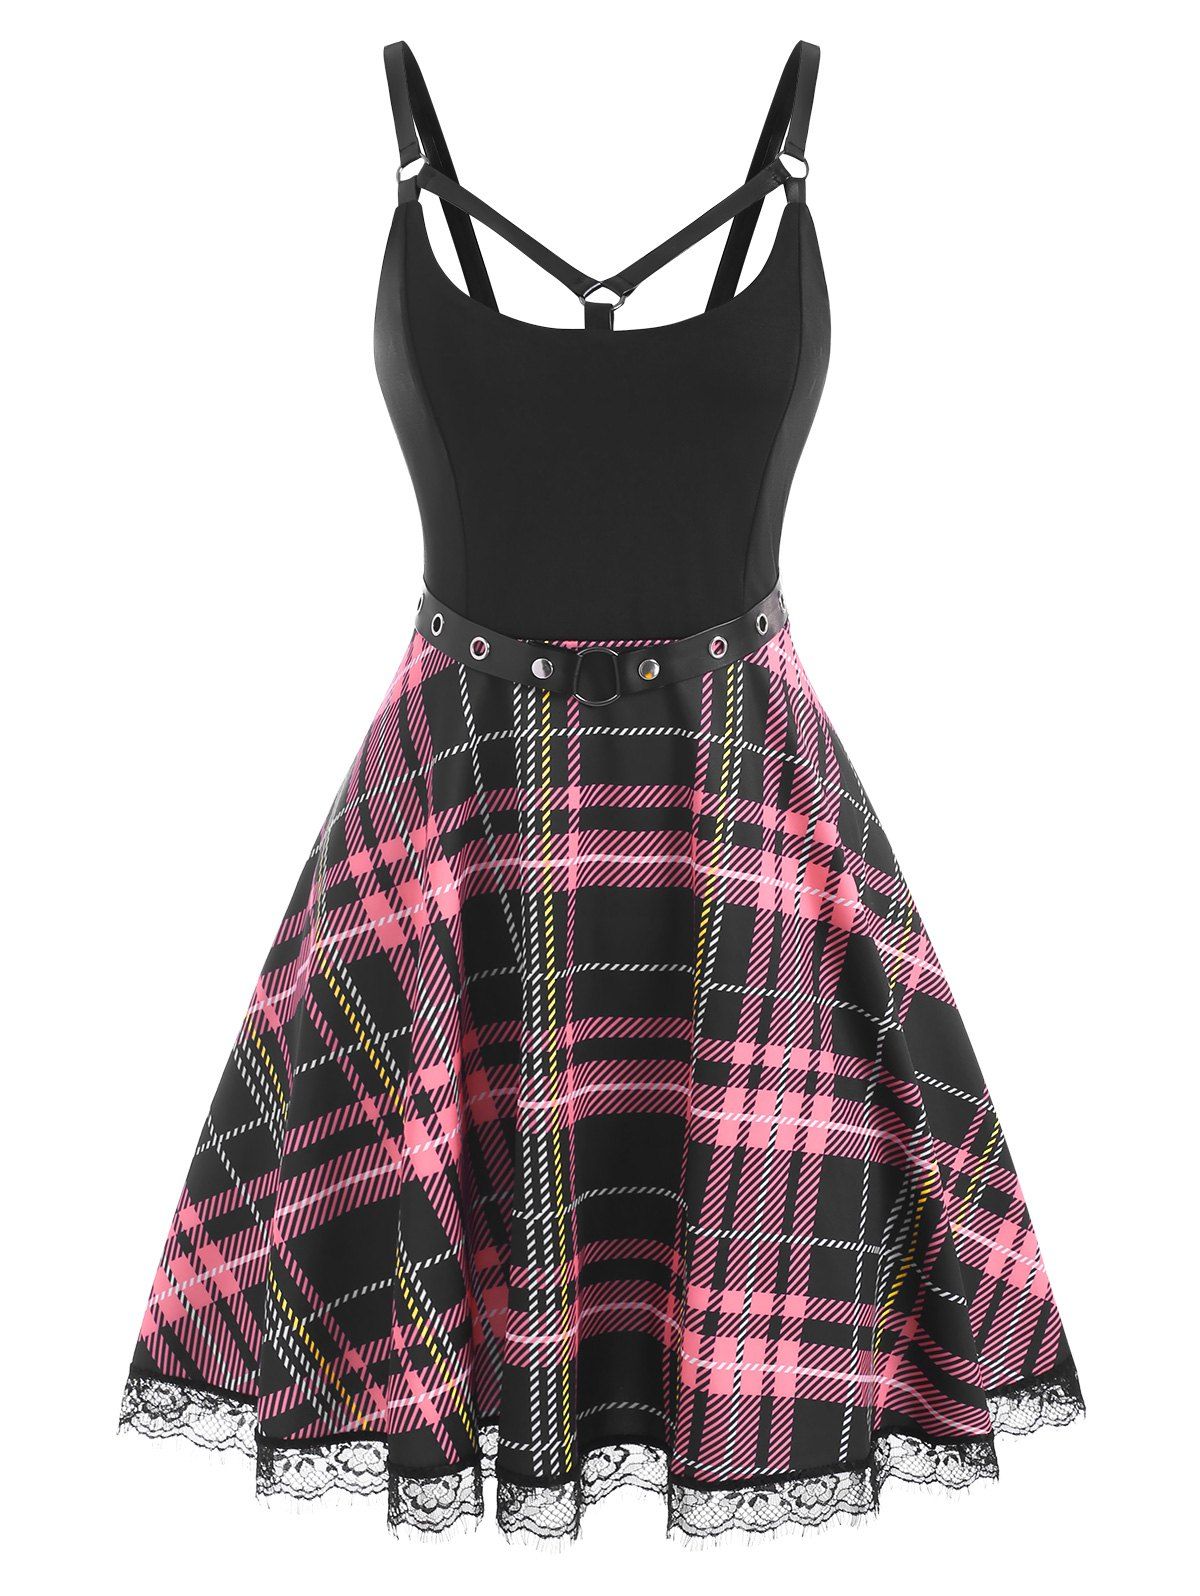 Plaid Lace Insert Belted Strappy Dress - LIGHT PINK M